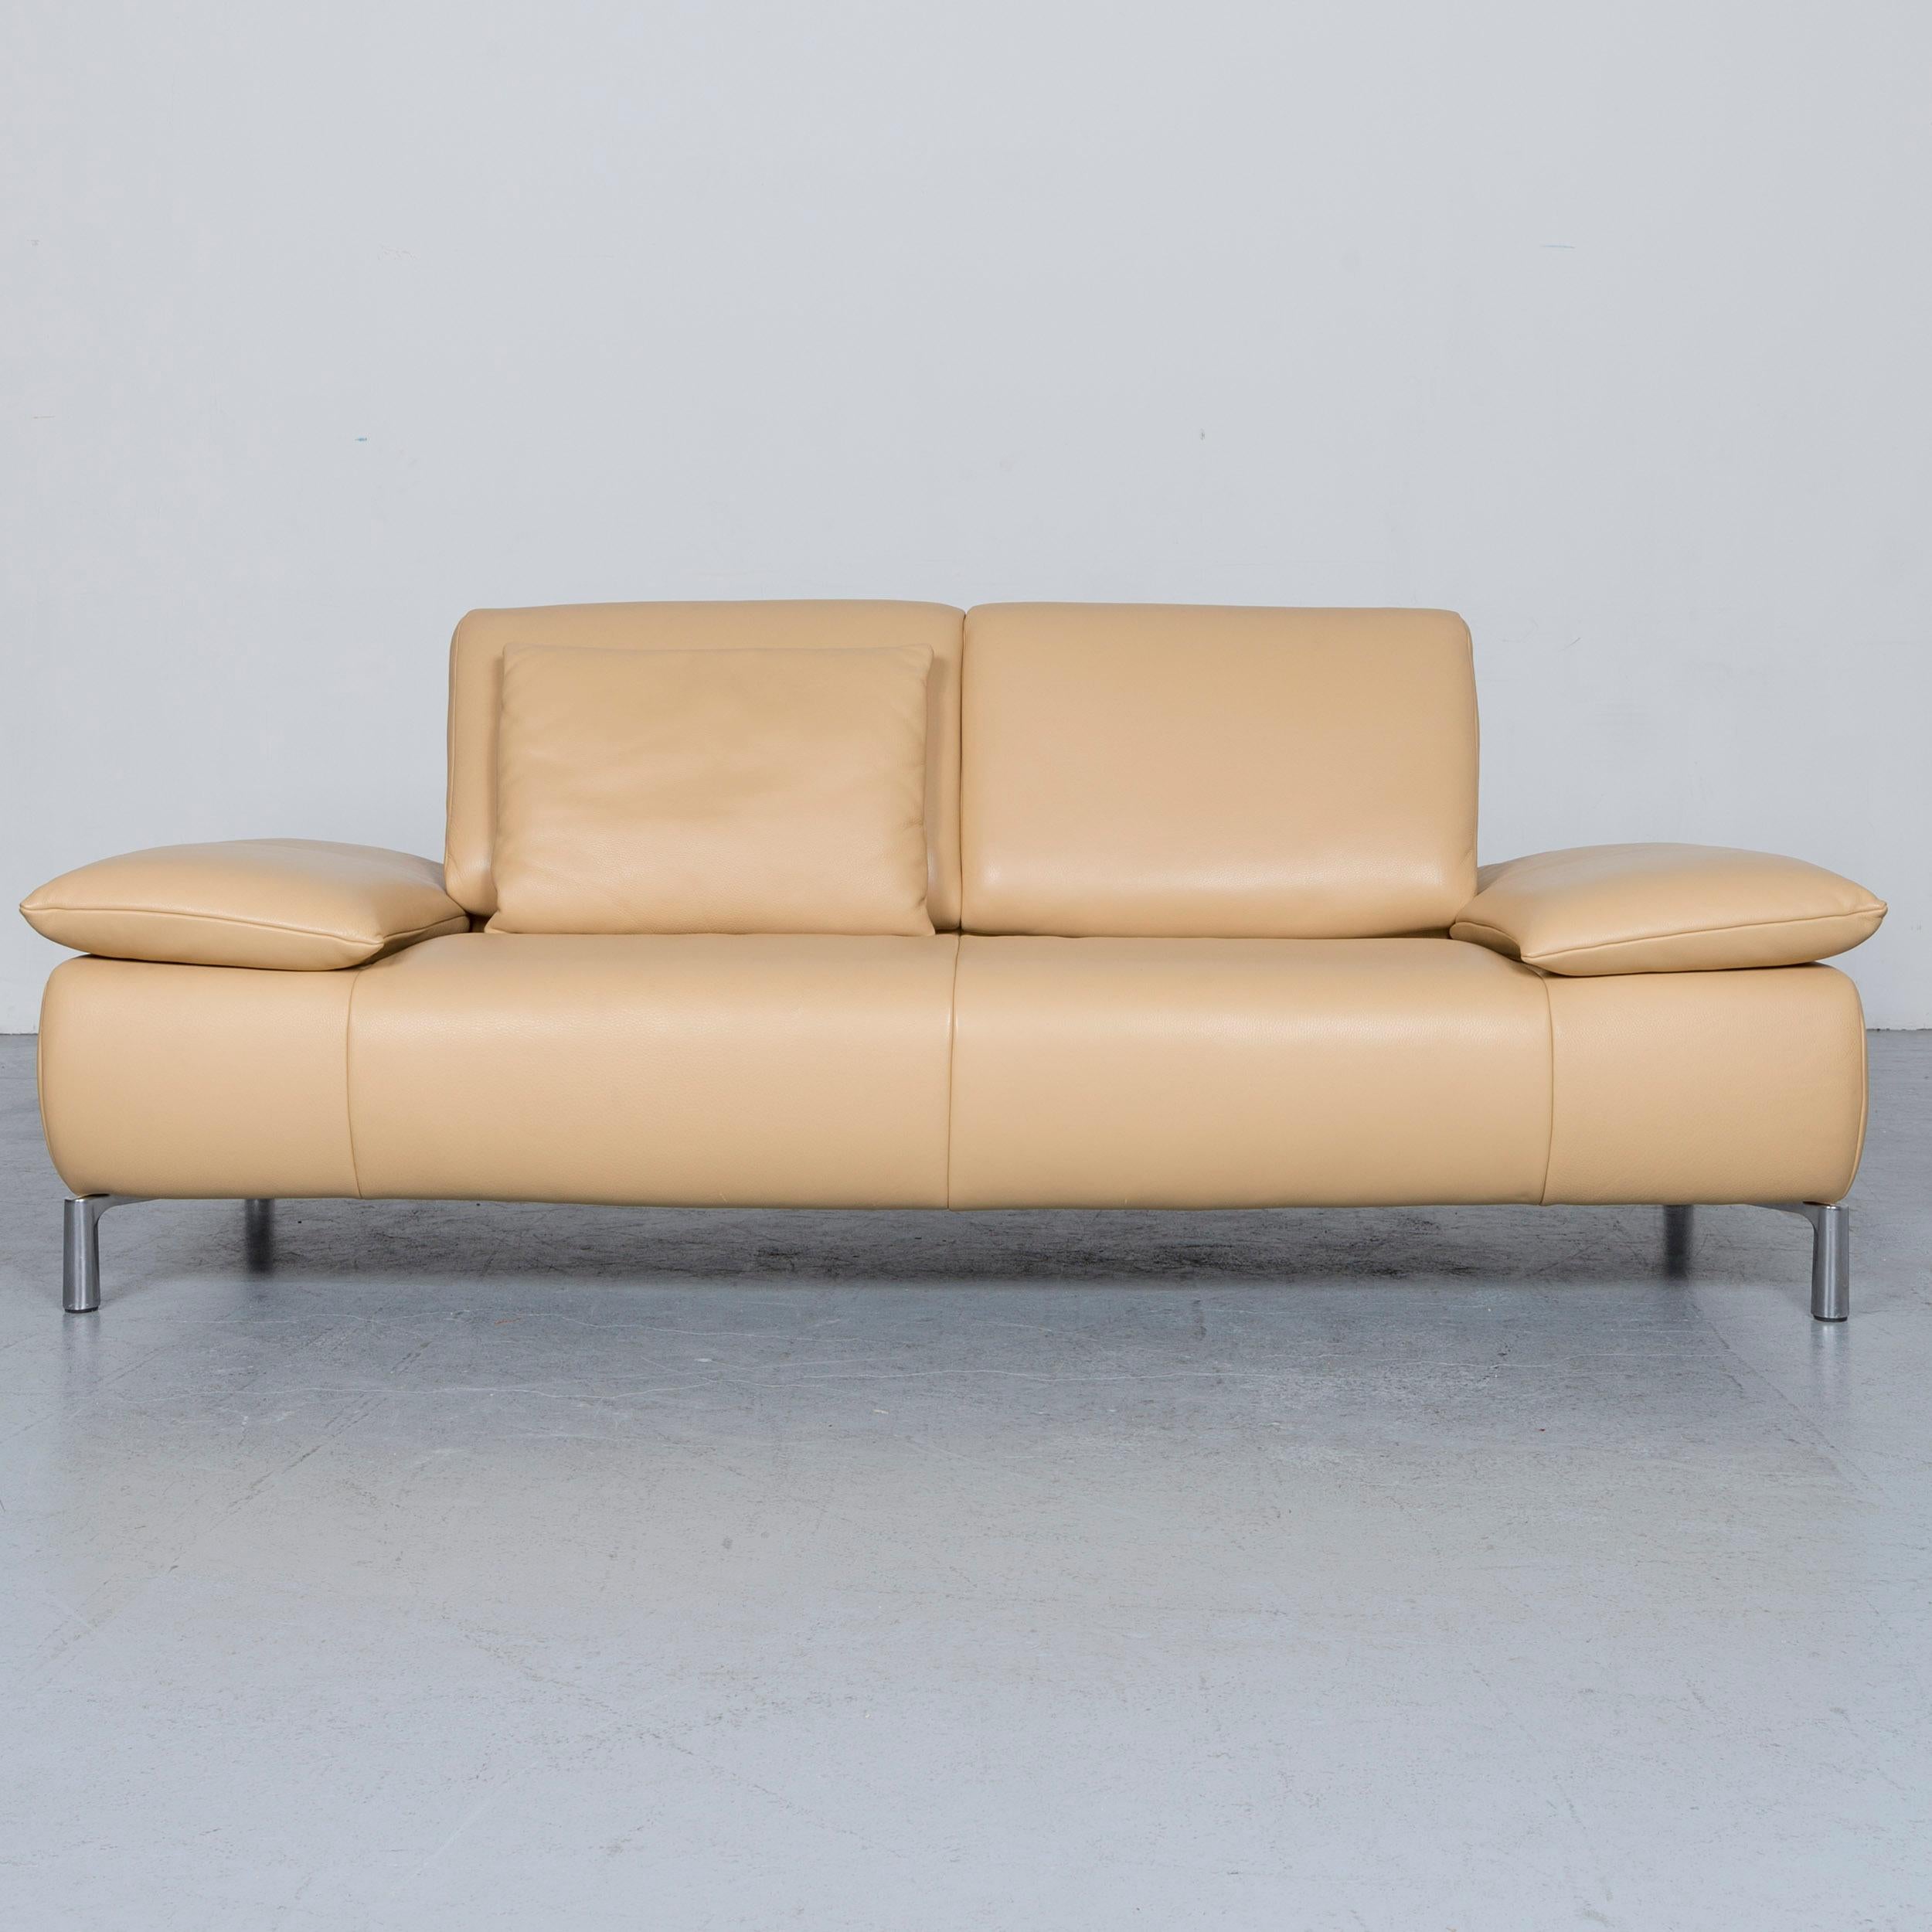 We bring to you an Koinor Goya designer leather sofa crème beige three-seat couch.